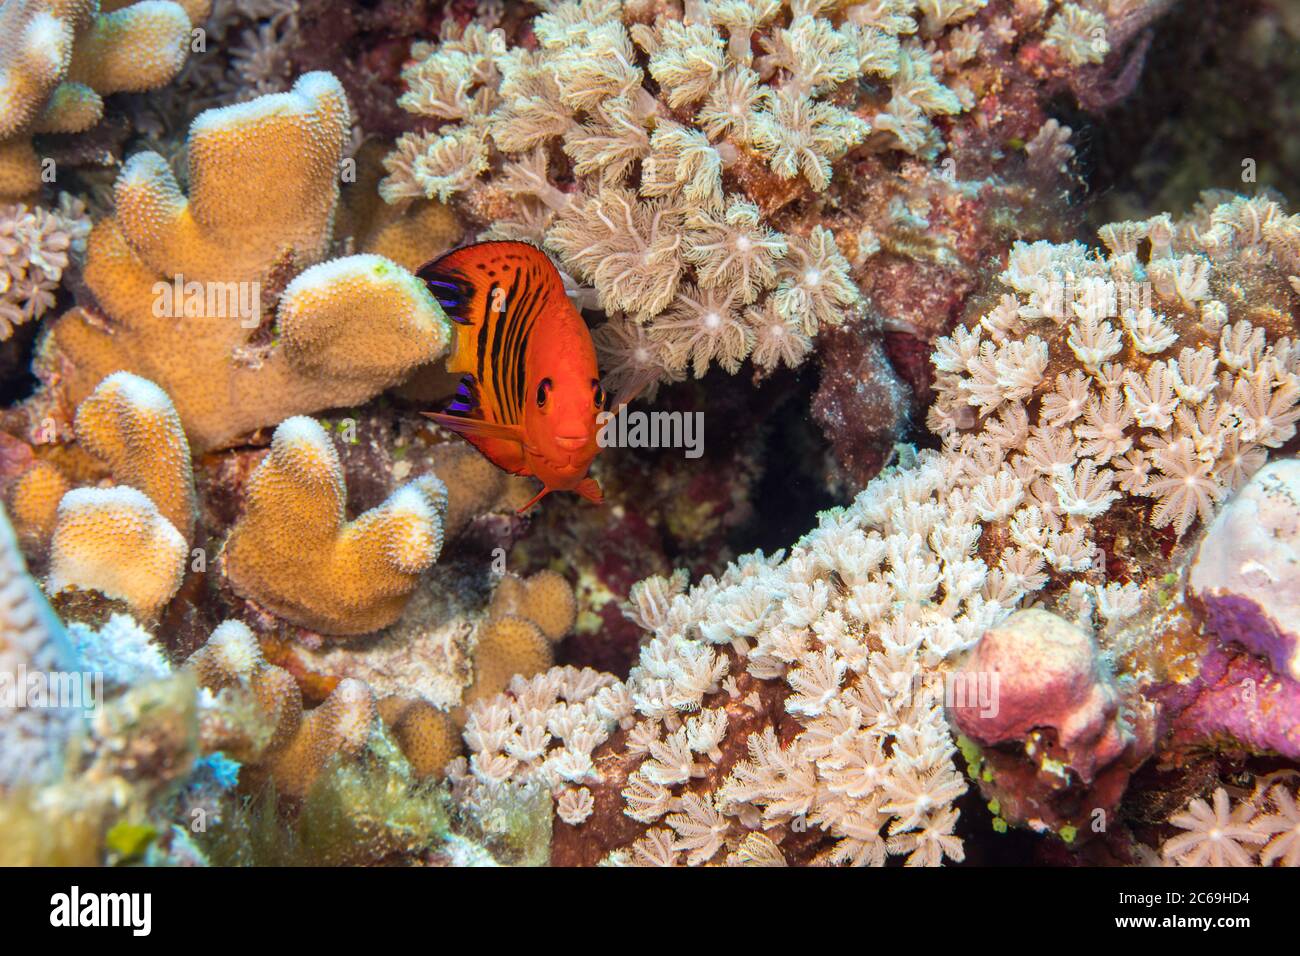 Flame angelfish, Centropyge loricula, on a reef off the island of Yap, Micronesia. Stock Photo